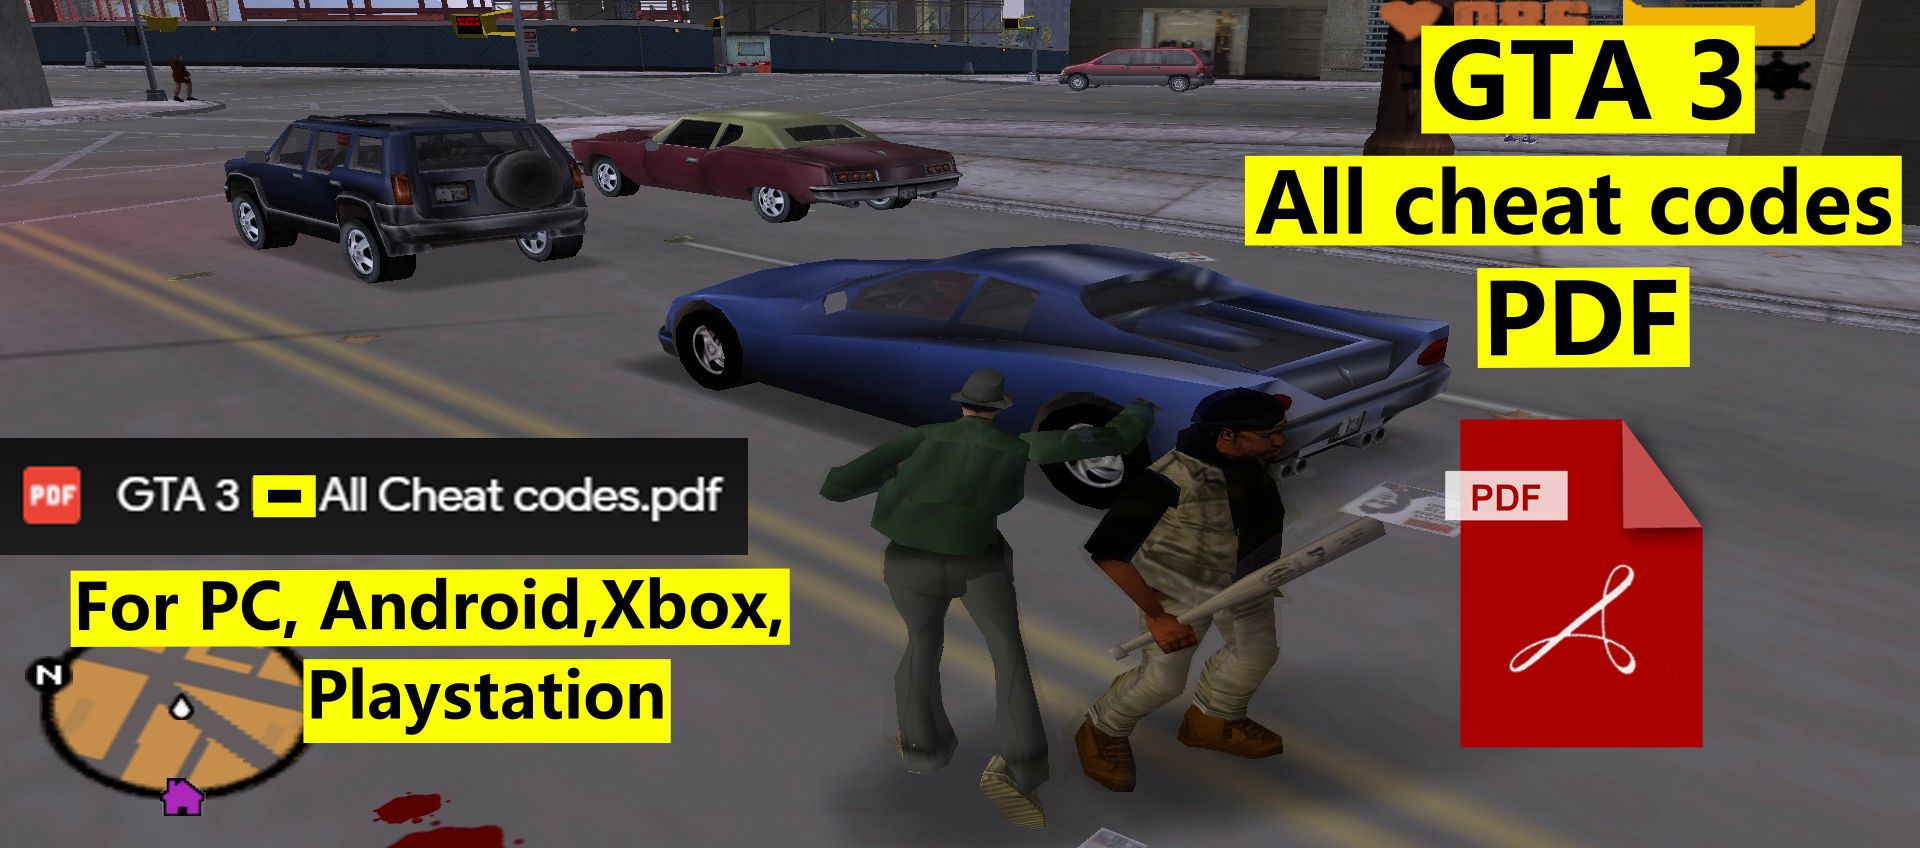 gta 3 pc does it have gore